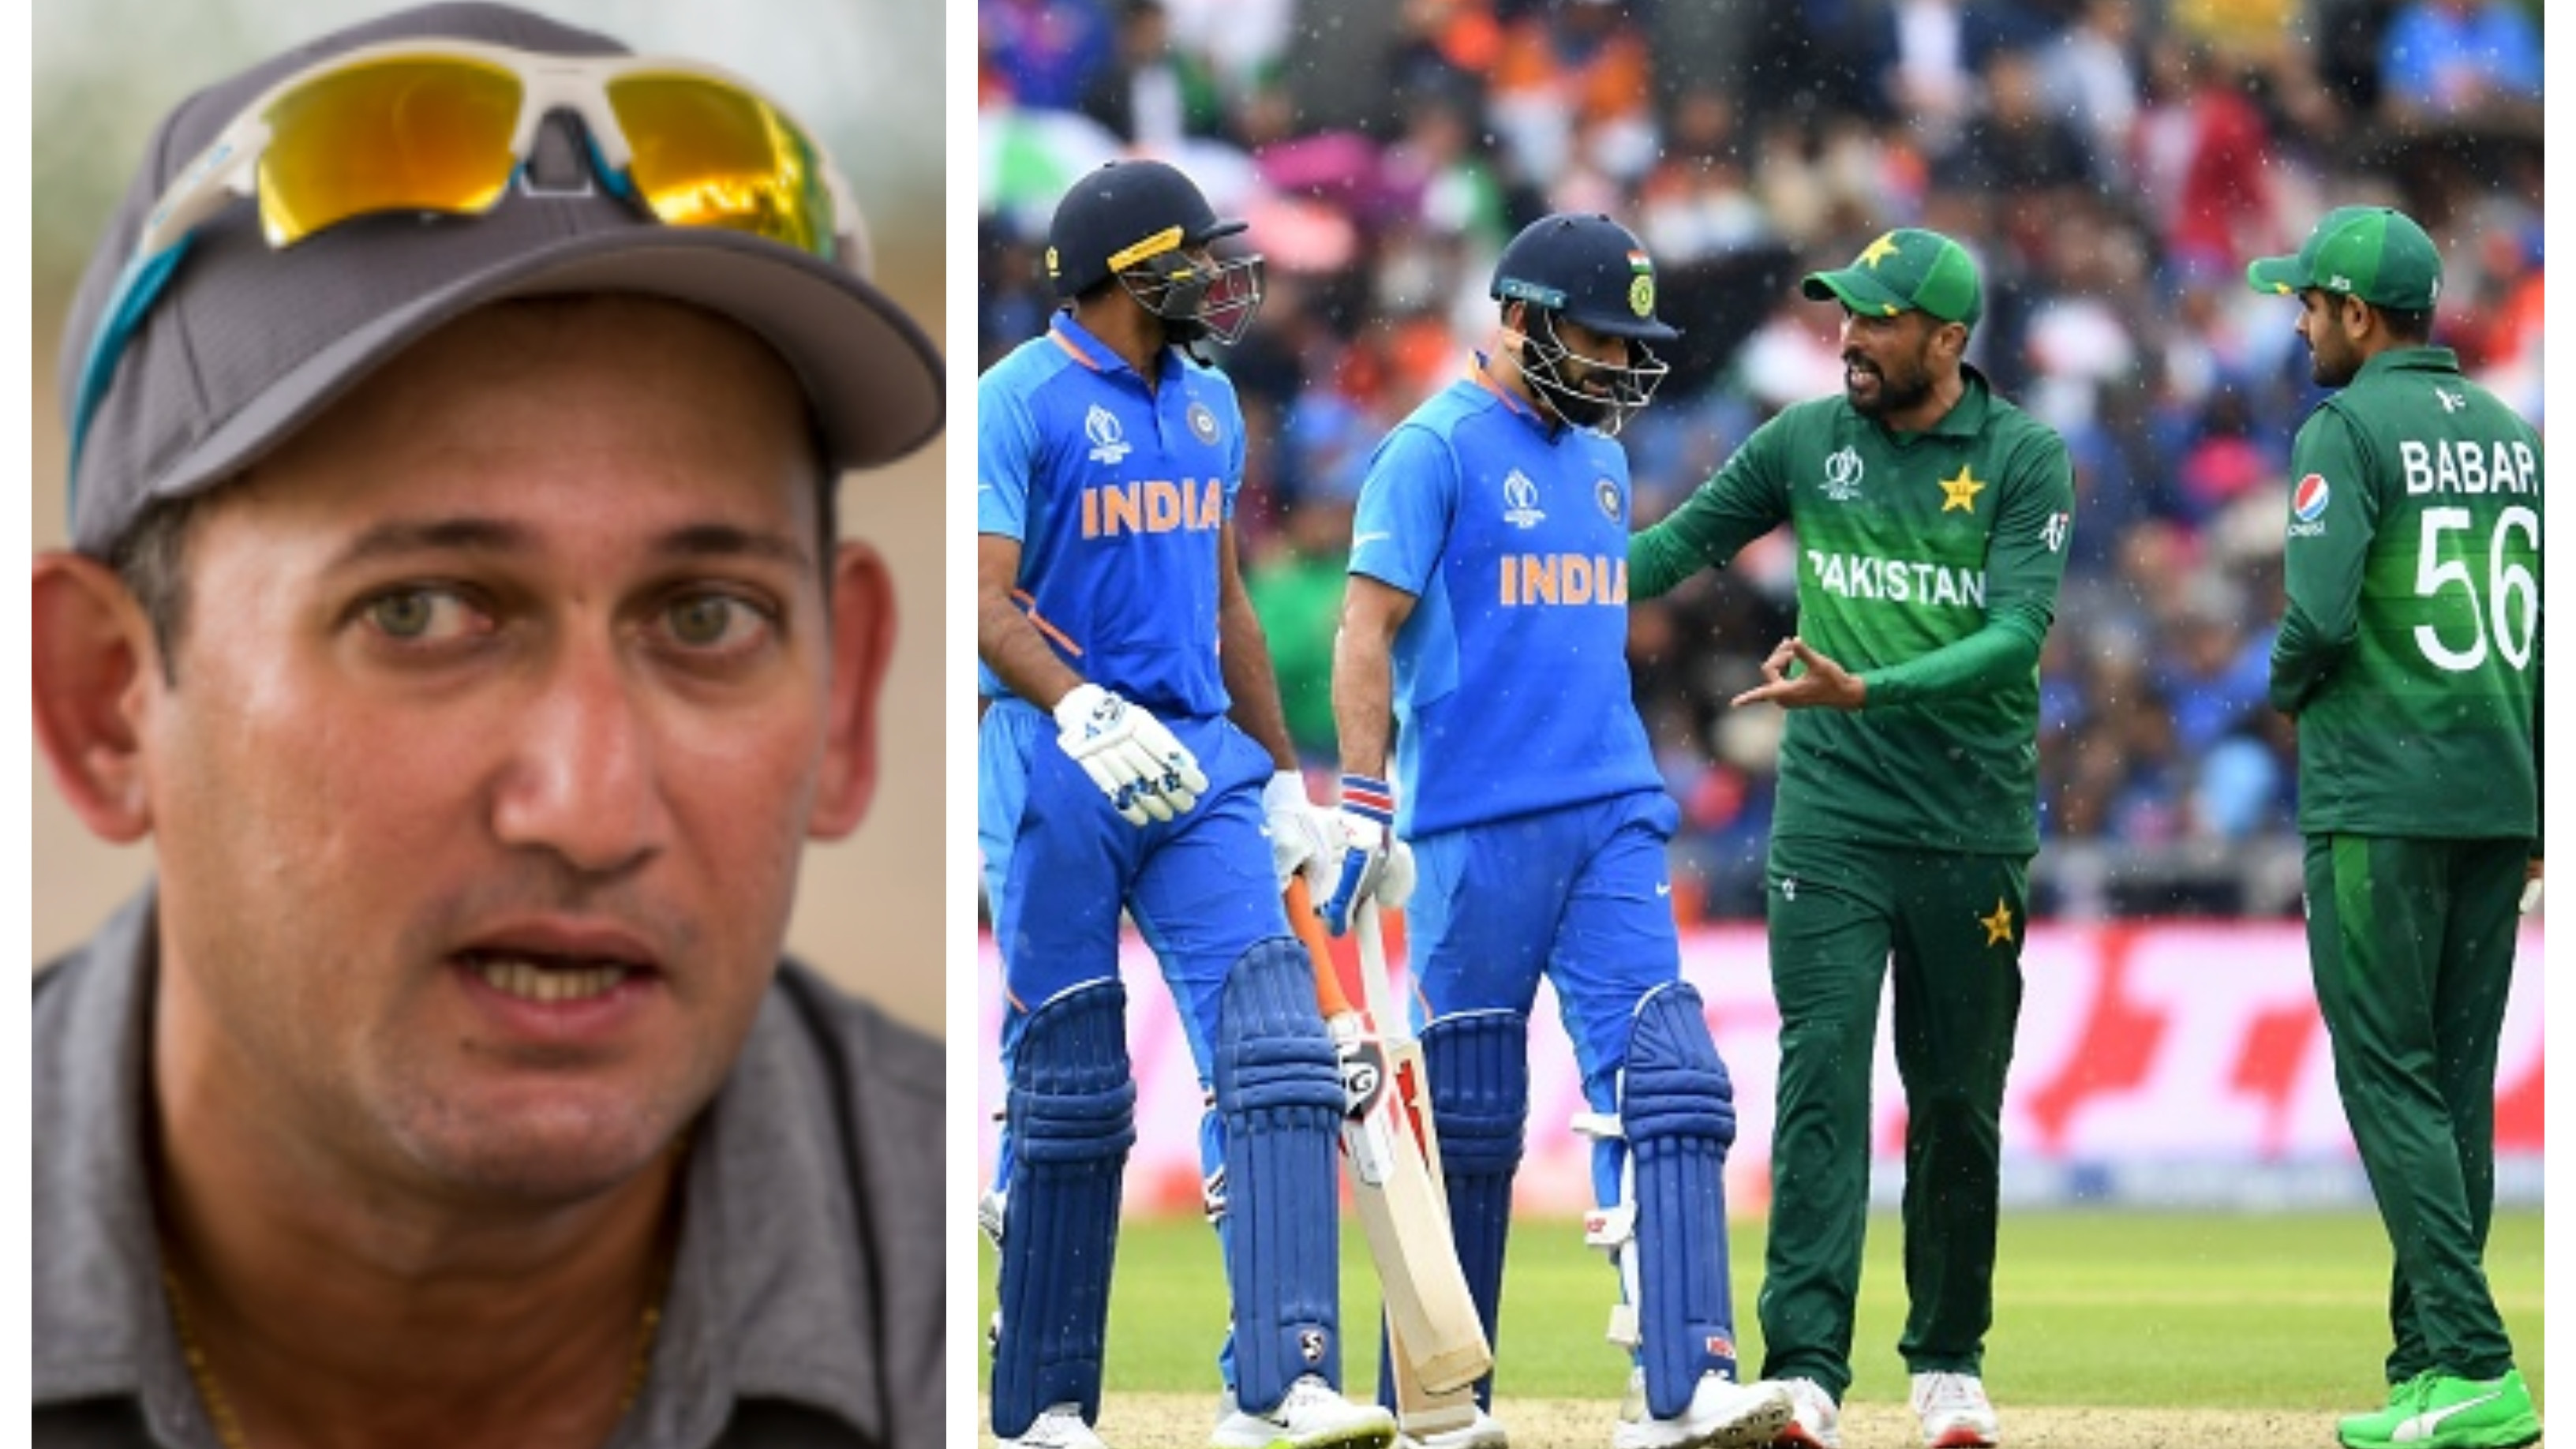 T20 World Cup 2021: ‘Don't think Pakistan will pose that much of a challenge’, Agarkar confident of India’s win